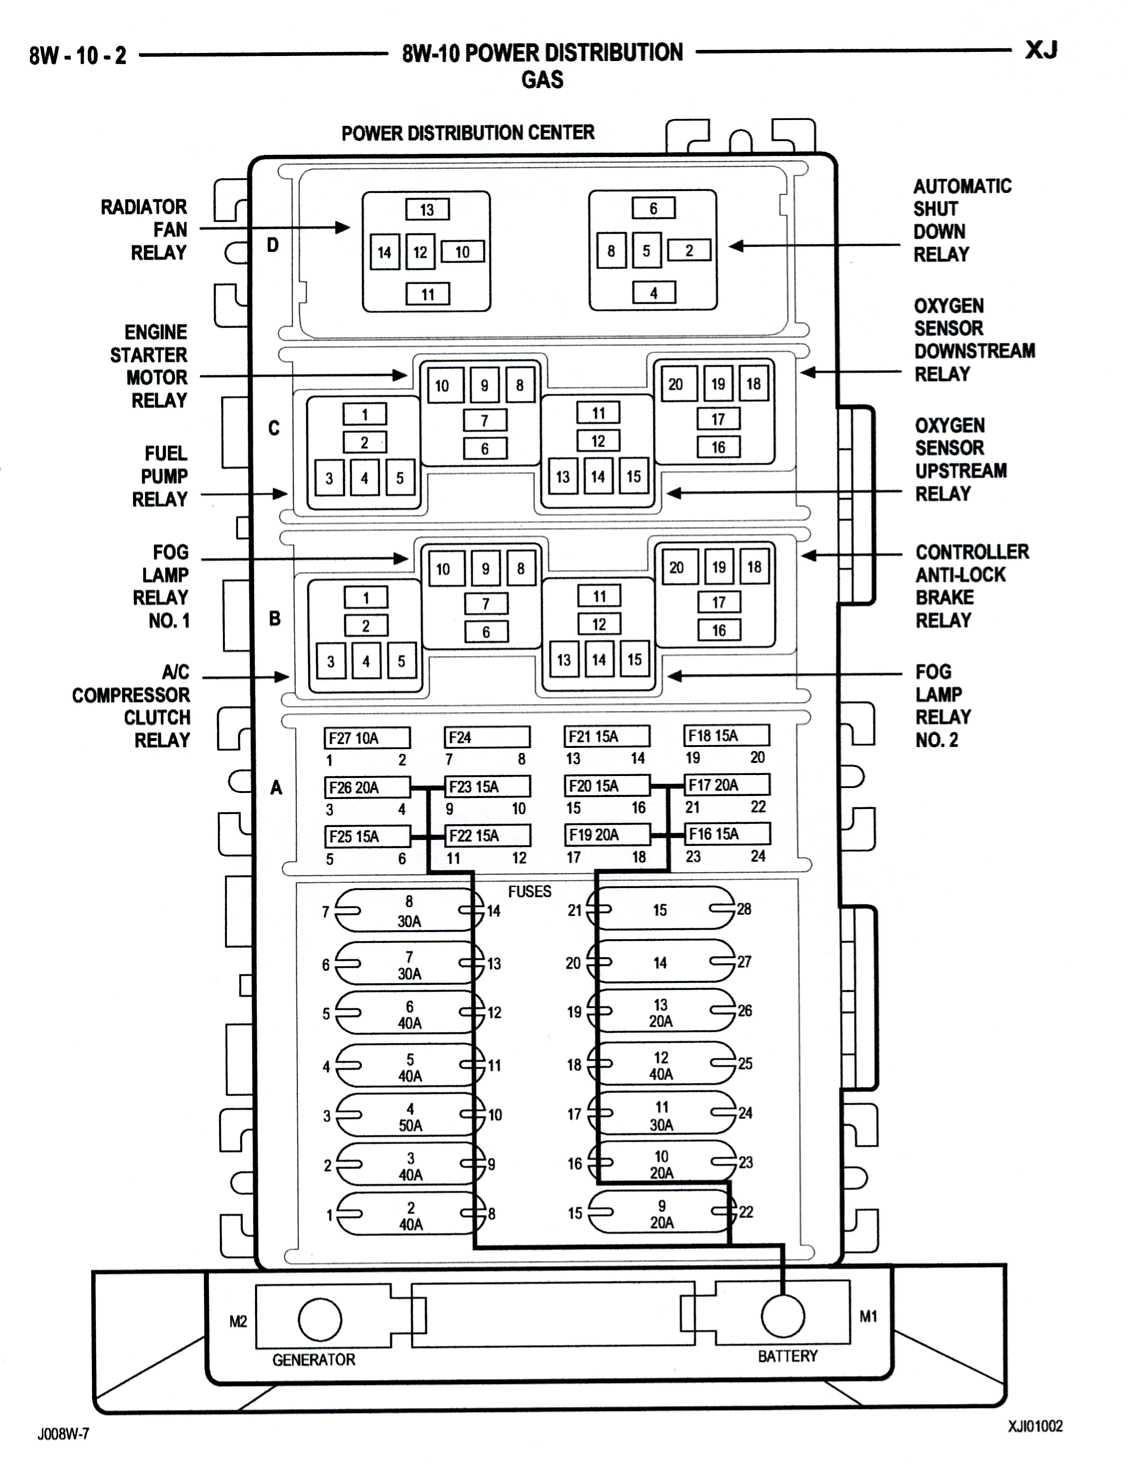 Ignition Not Sending Signal To Starter Relay - Jeep ... 01 grand cherokee fuse box diagram 